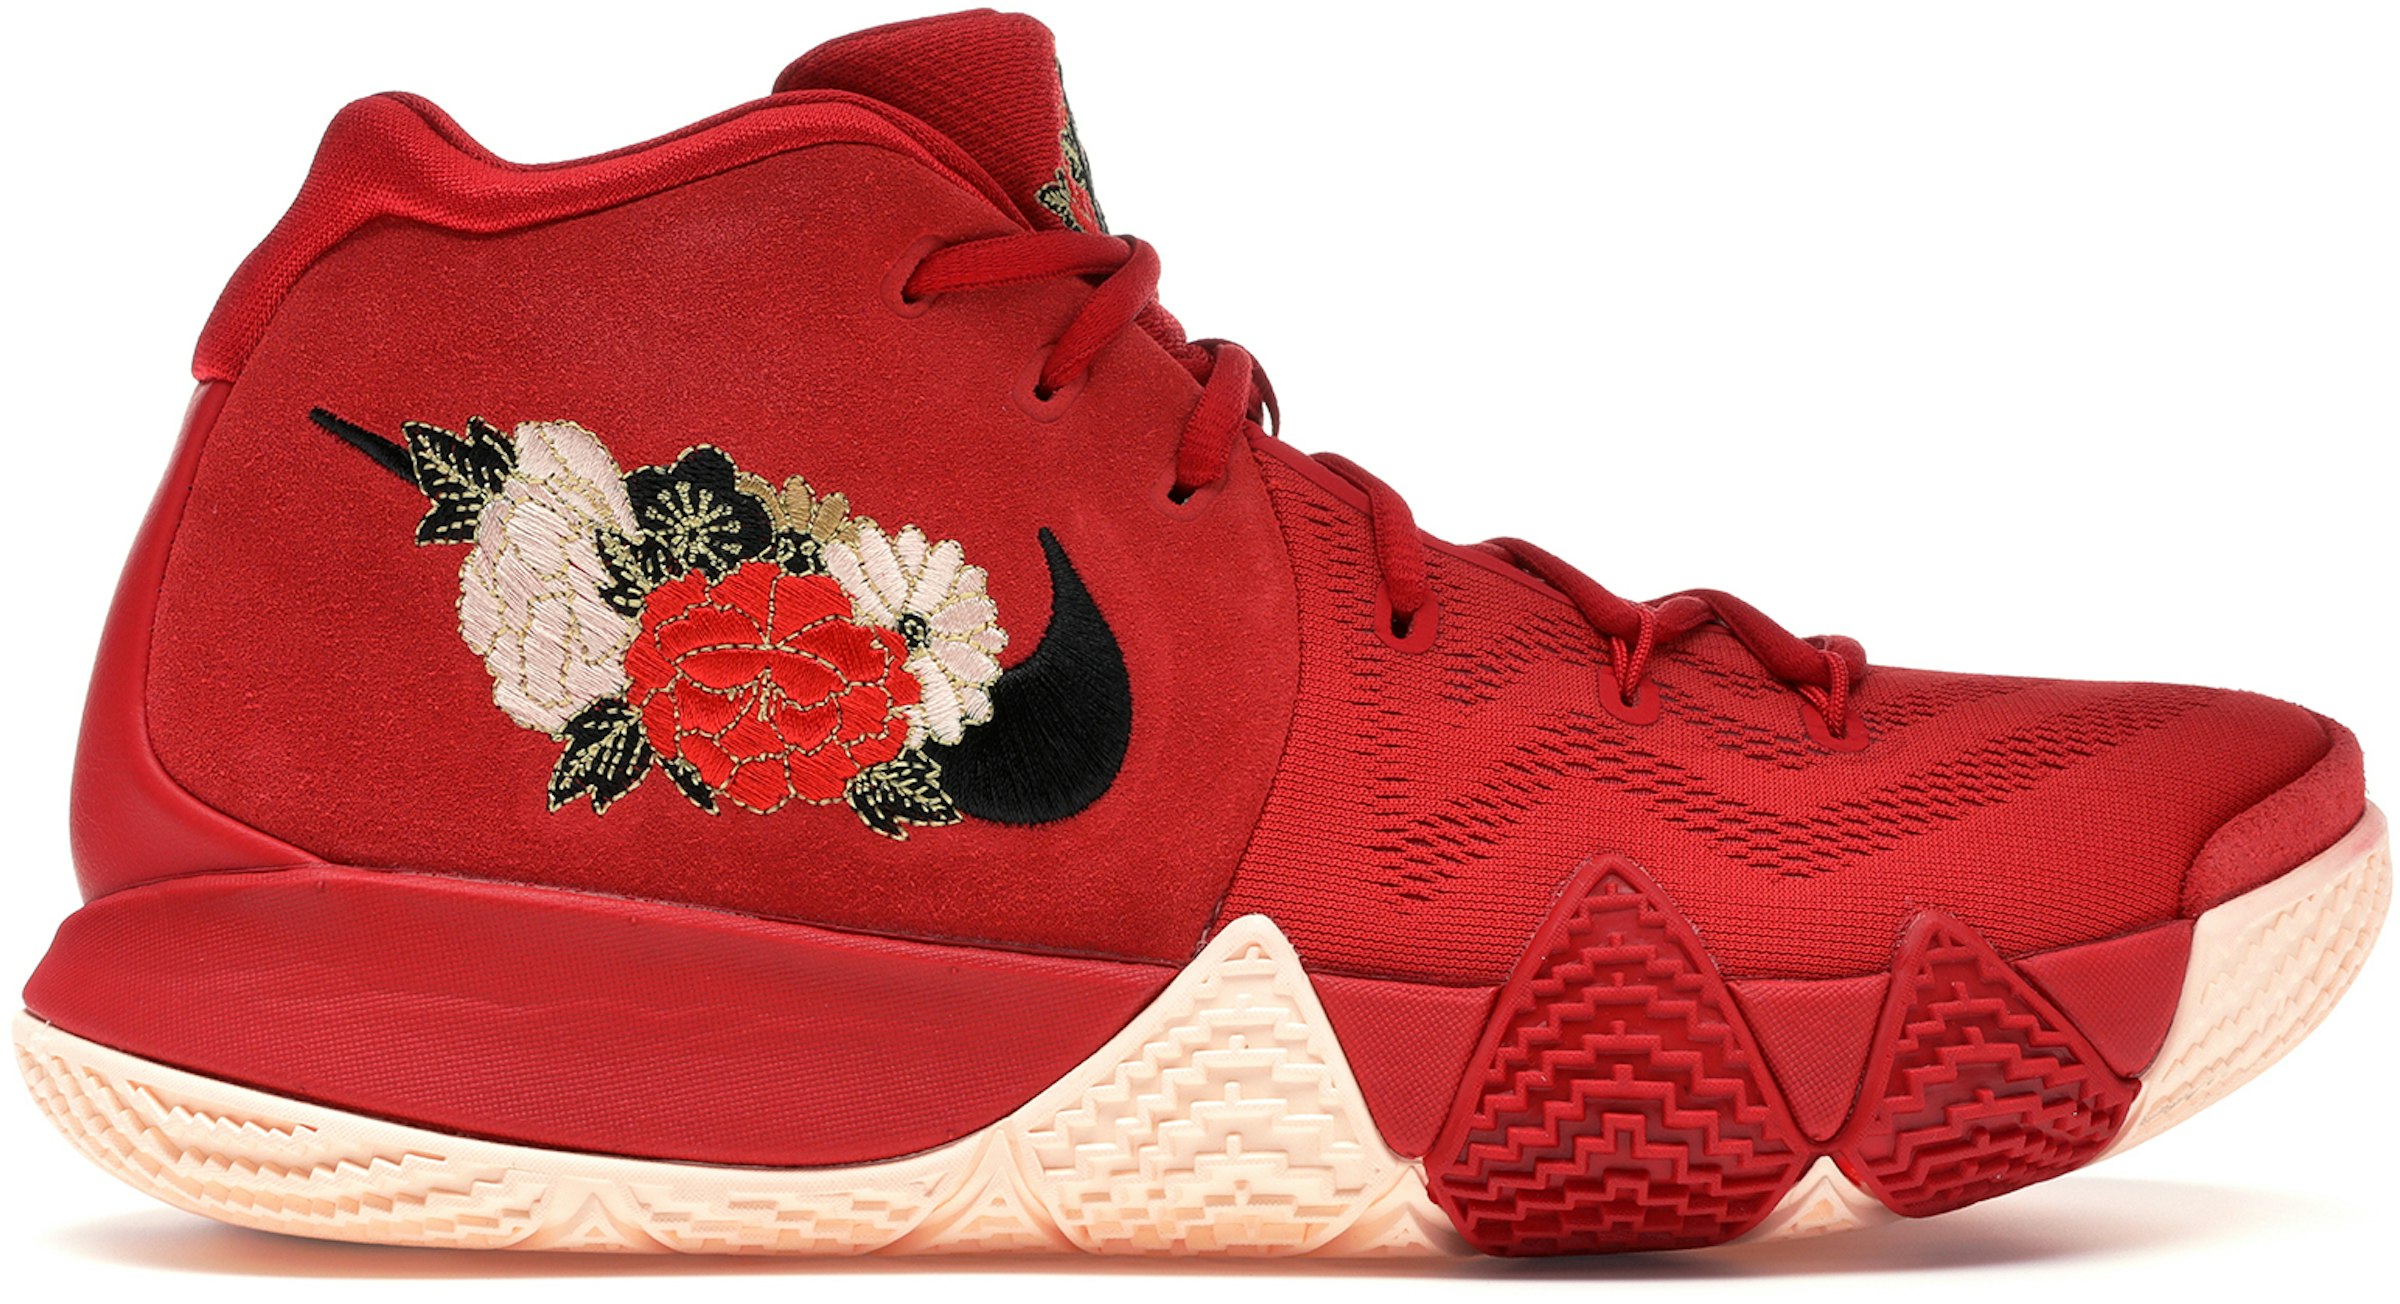 Nike Kyrie 4 Chinese New Year (2018) Men's - 943807-600/943806-600 US